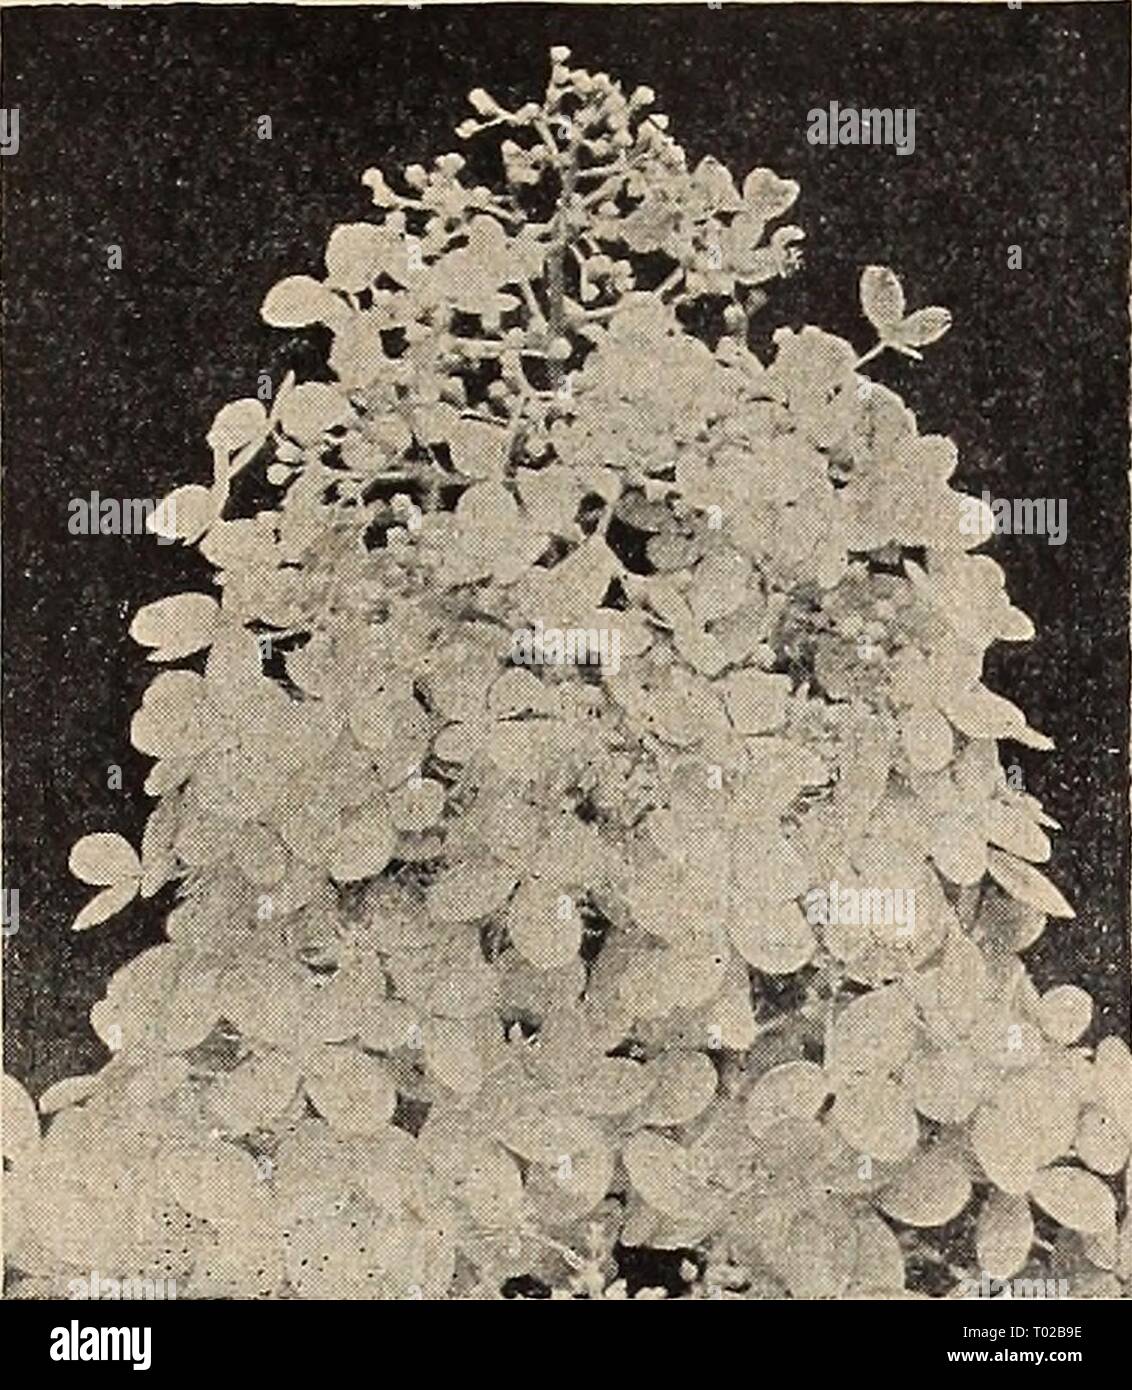 Dreer's garden book for 1942 . dreersgardenbook1942henr Year: 1942  Forsythia spectabilis Forsythia—Go/den Bell (M) ® 26-138 Spectabilis. A glorious spring- flowering bush growing 6-8 ft. tall, covered completely with very large golden yellow flowers before the leaves appear. Size 3-4 ft., 60c each. Red-Leaved Japanese Maple 26-151 Acer palmatum atropurpur- eum. (JM) Magnificent purple-red foli- age of attractive, gracefully laciniated form. A showy well-branched shrub while young, eventually growing into a well-shaped small tree. Most attractive at all seasons. Strong plants, size lJ-2 ft., $ Stock Photo